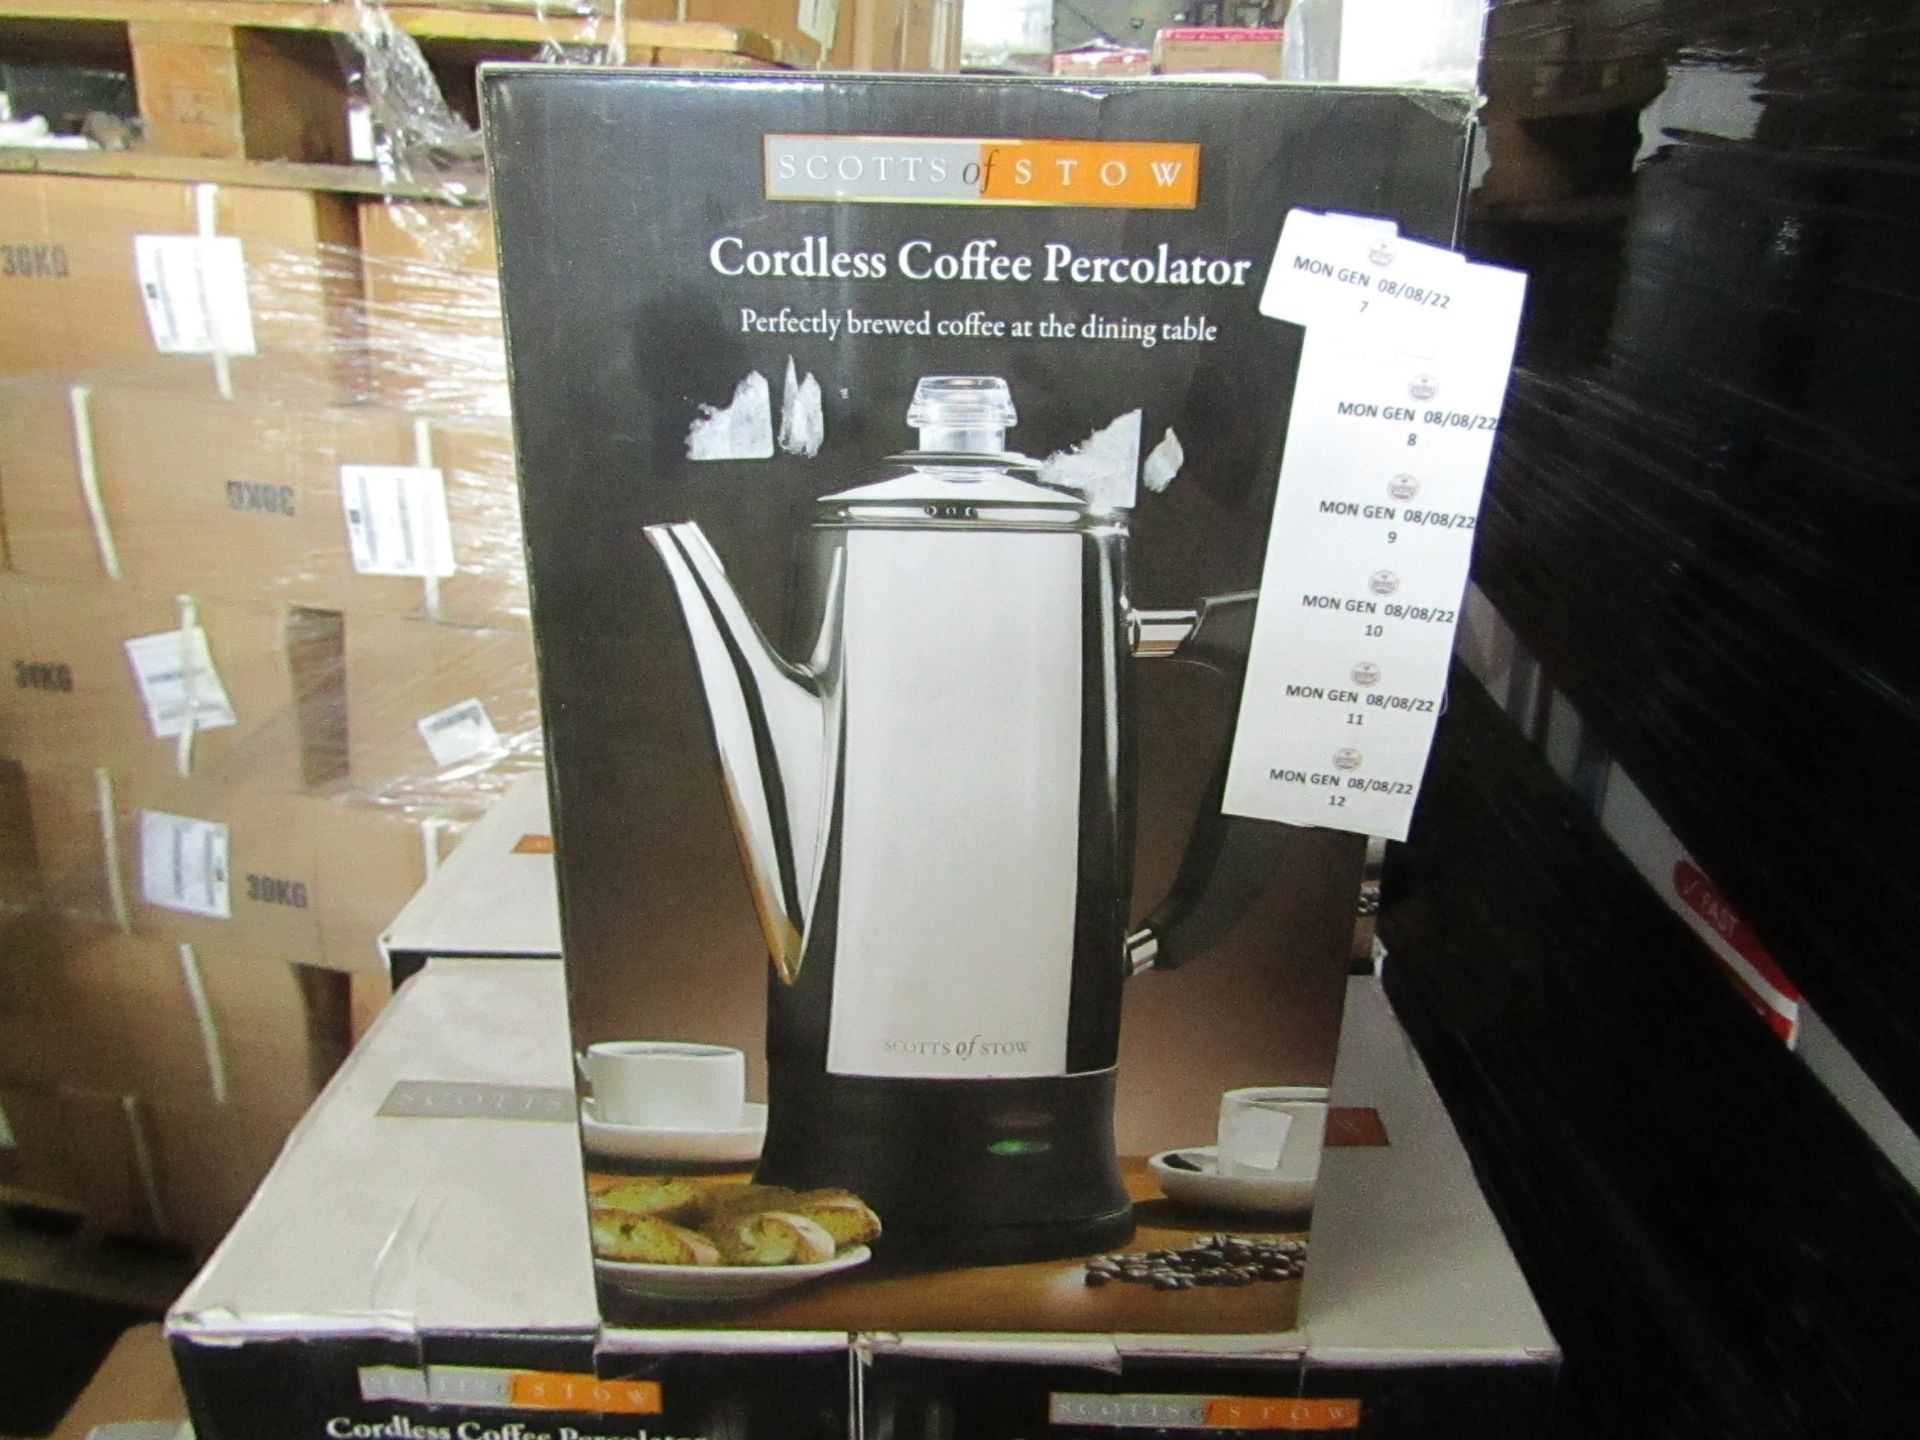 Scotts of Stow Cordless Electric Coffee Percolator RRP Â£59.95 - This product has been graded in B